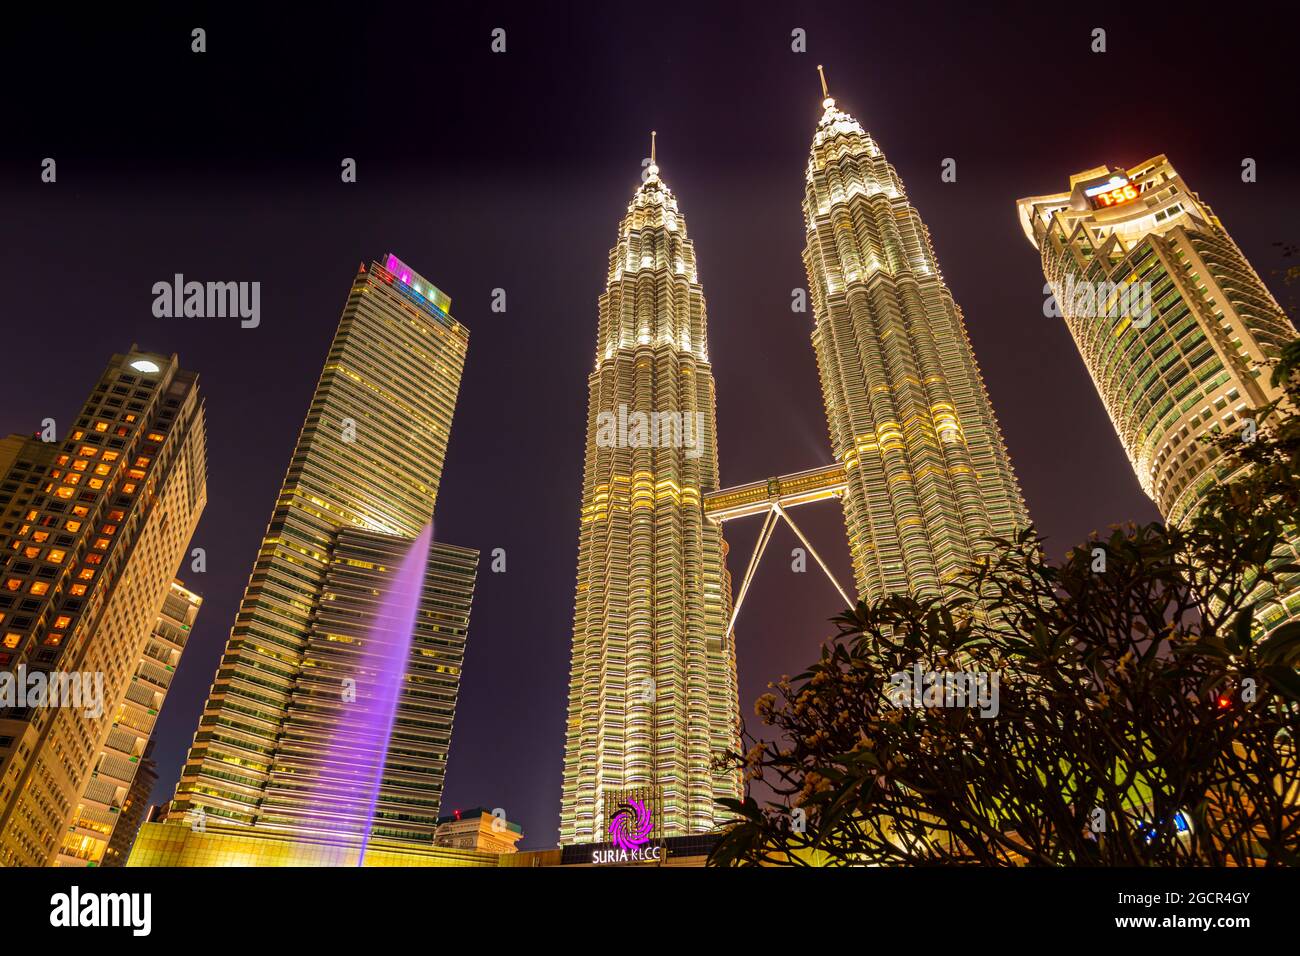 Kuala Lumpur, Malaysia - November 28, 2020: At night at the Petronas tower or twin towers in the heart of the South East Asia metropolis. Suria KL tow Stock Photo